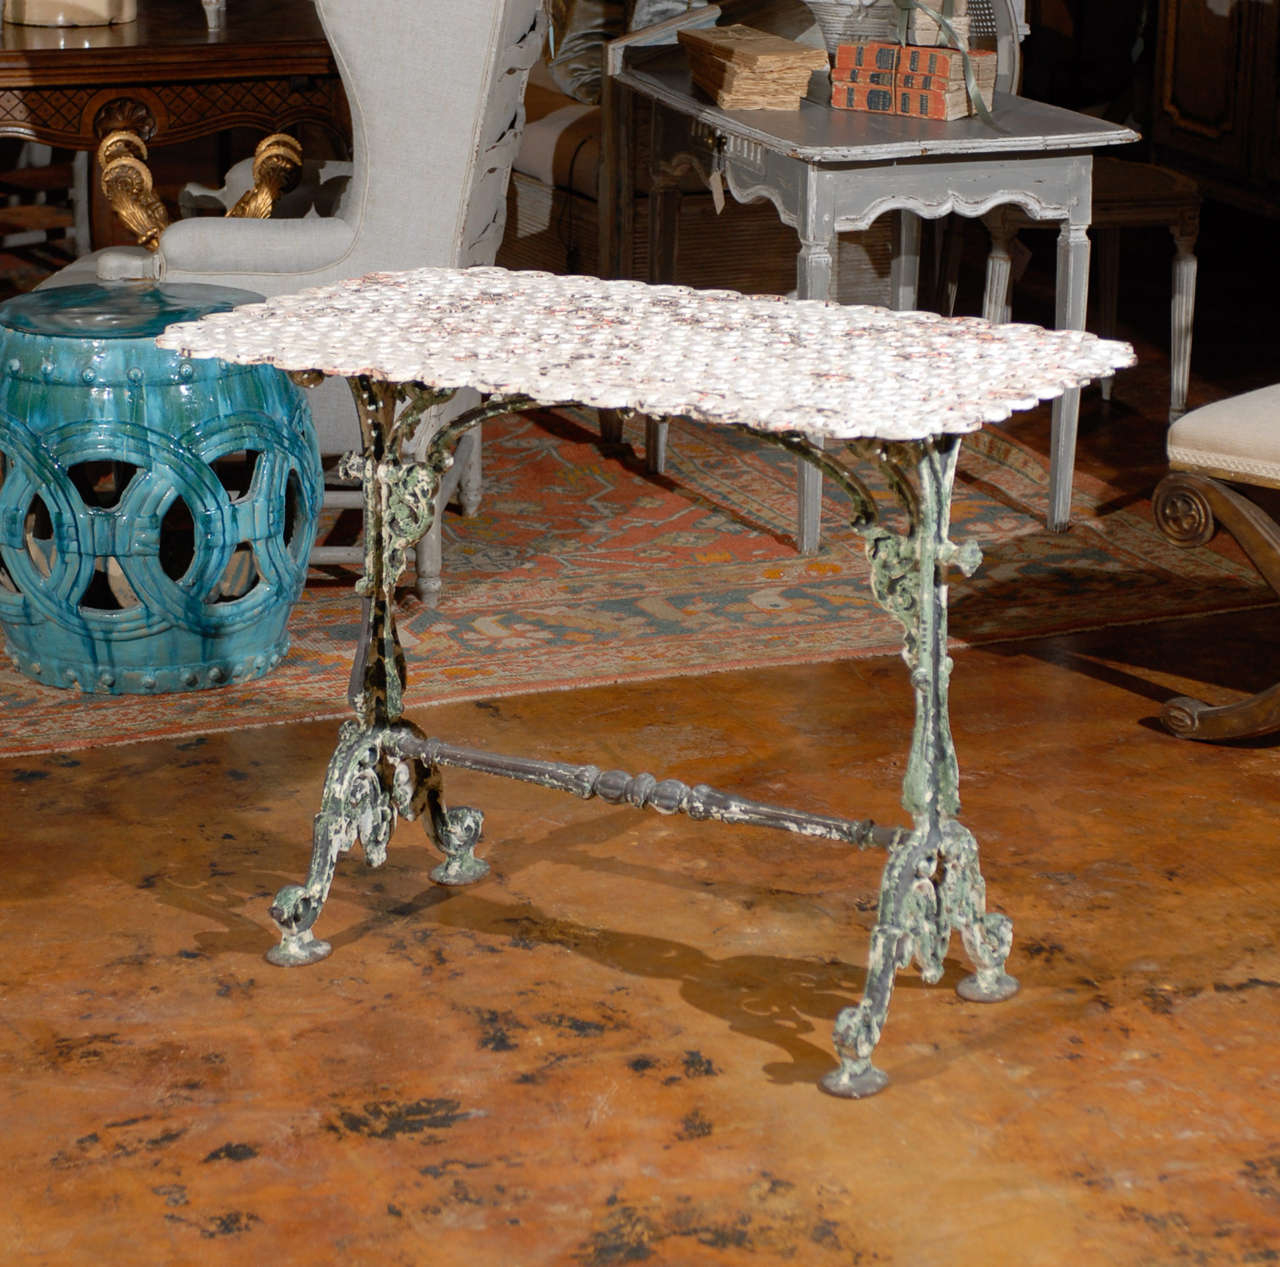 French wrought iron table with pierced top

To see more items from Foxglove Antiques, please visit our website: www.foxgloveantiques.com